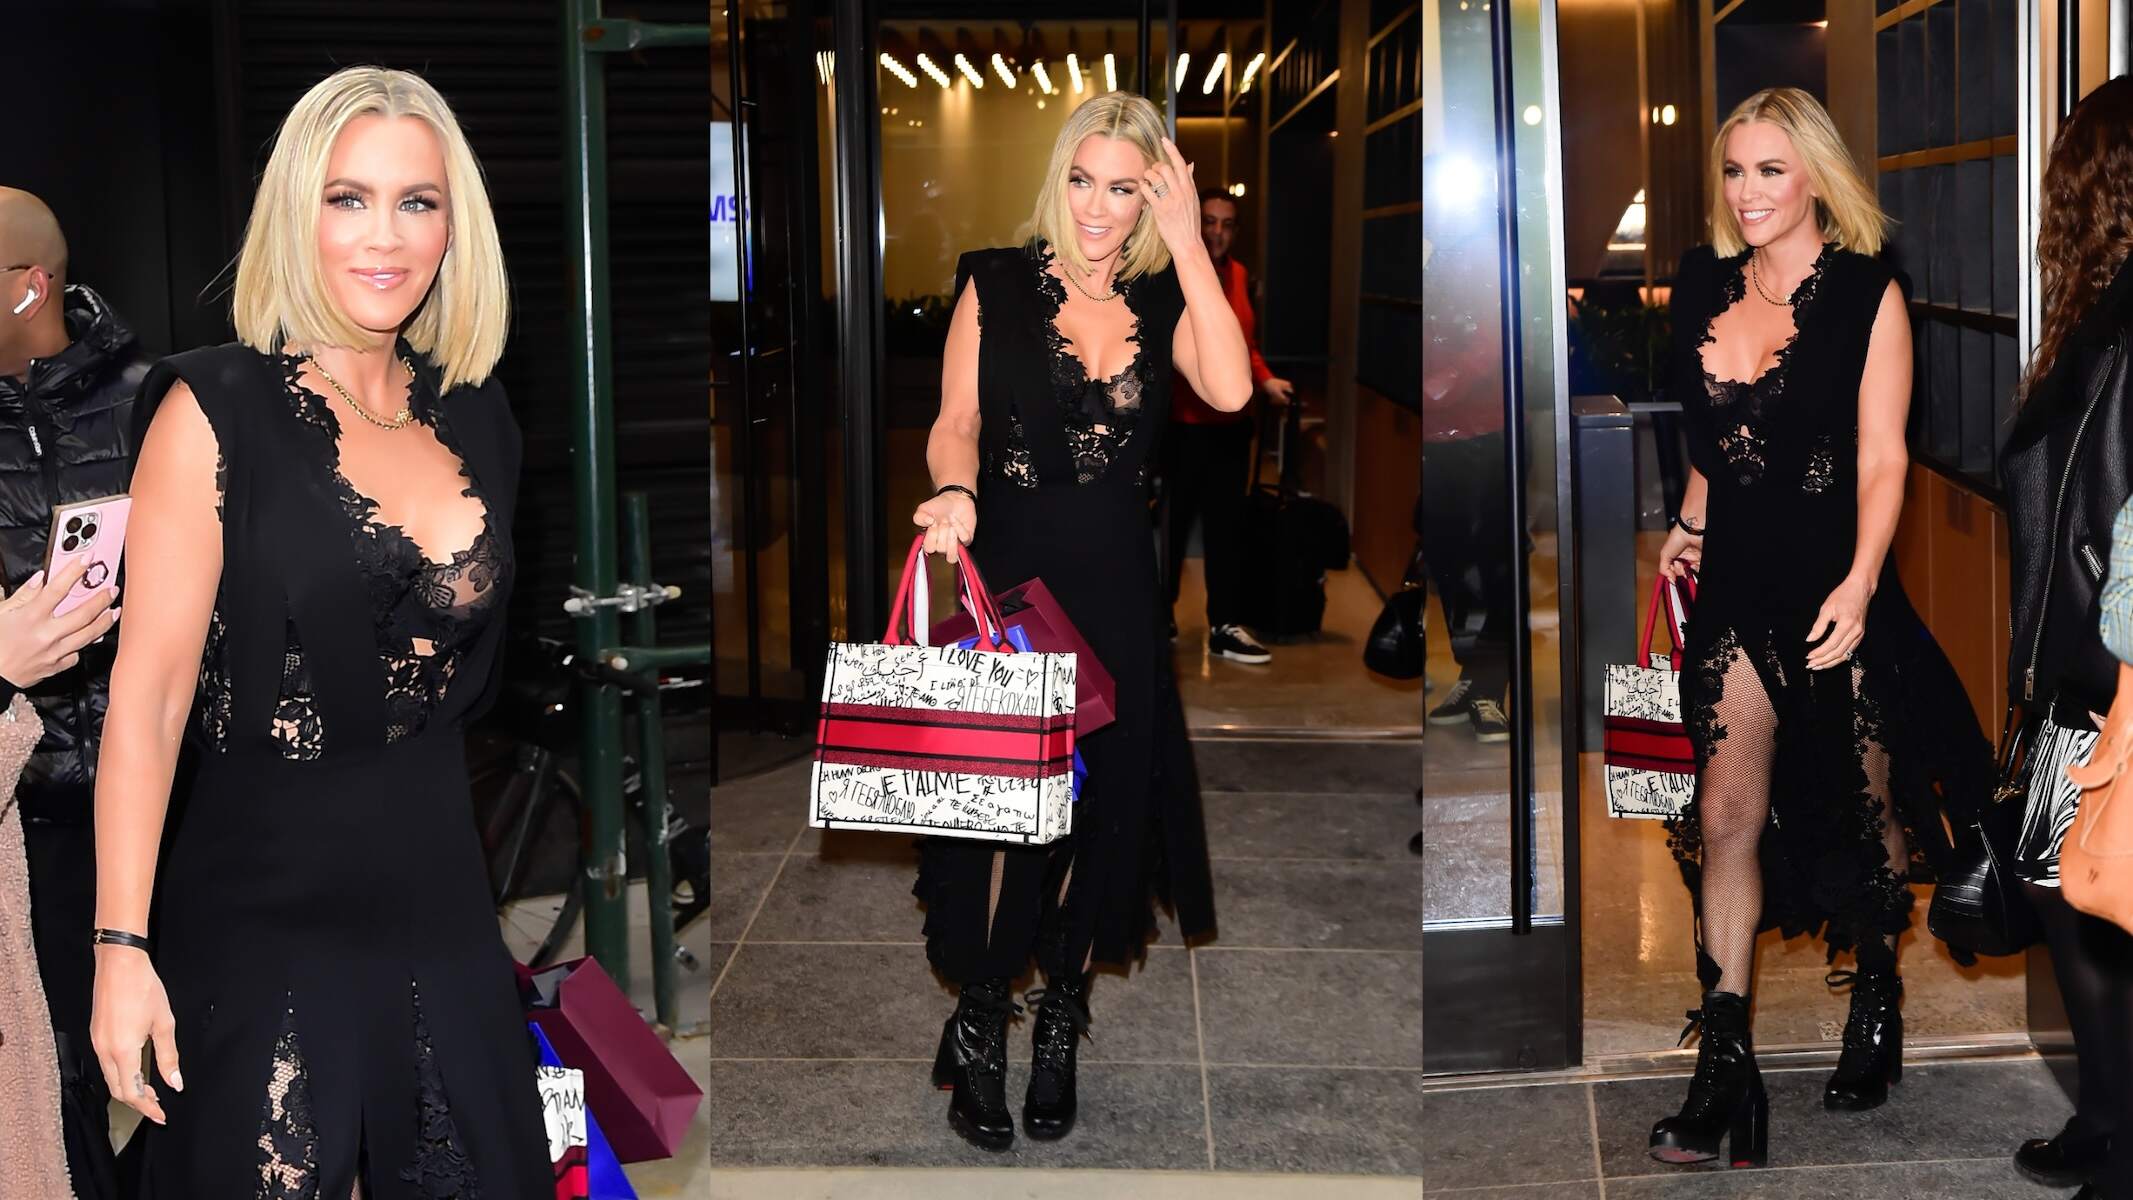 Actor Jenny McCarthy wears a lacy black dress while leaving the Bravo studios